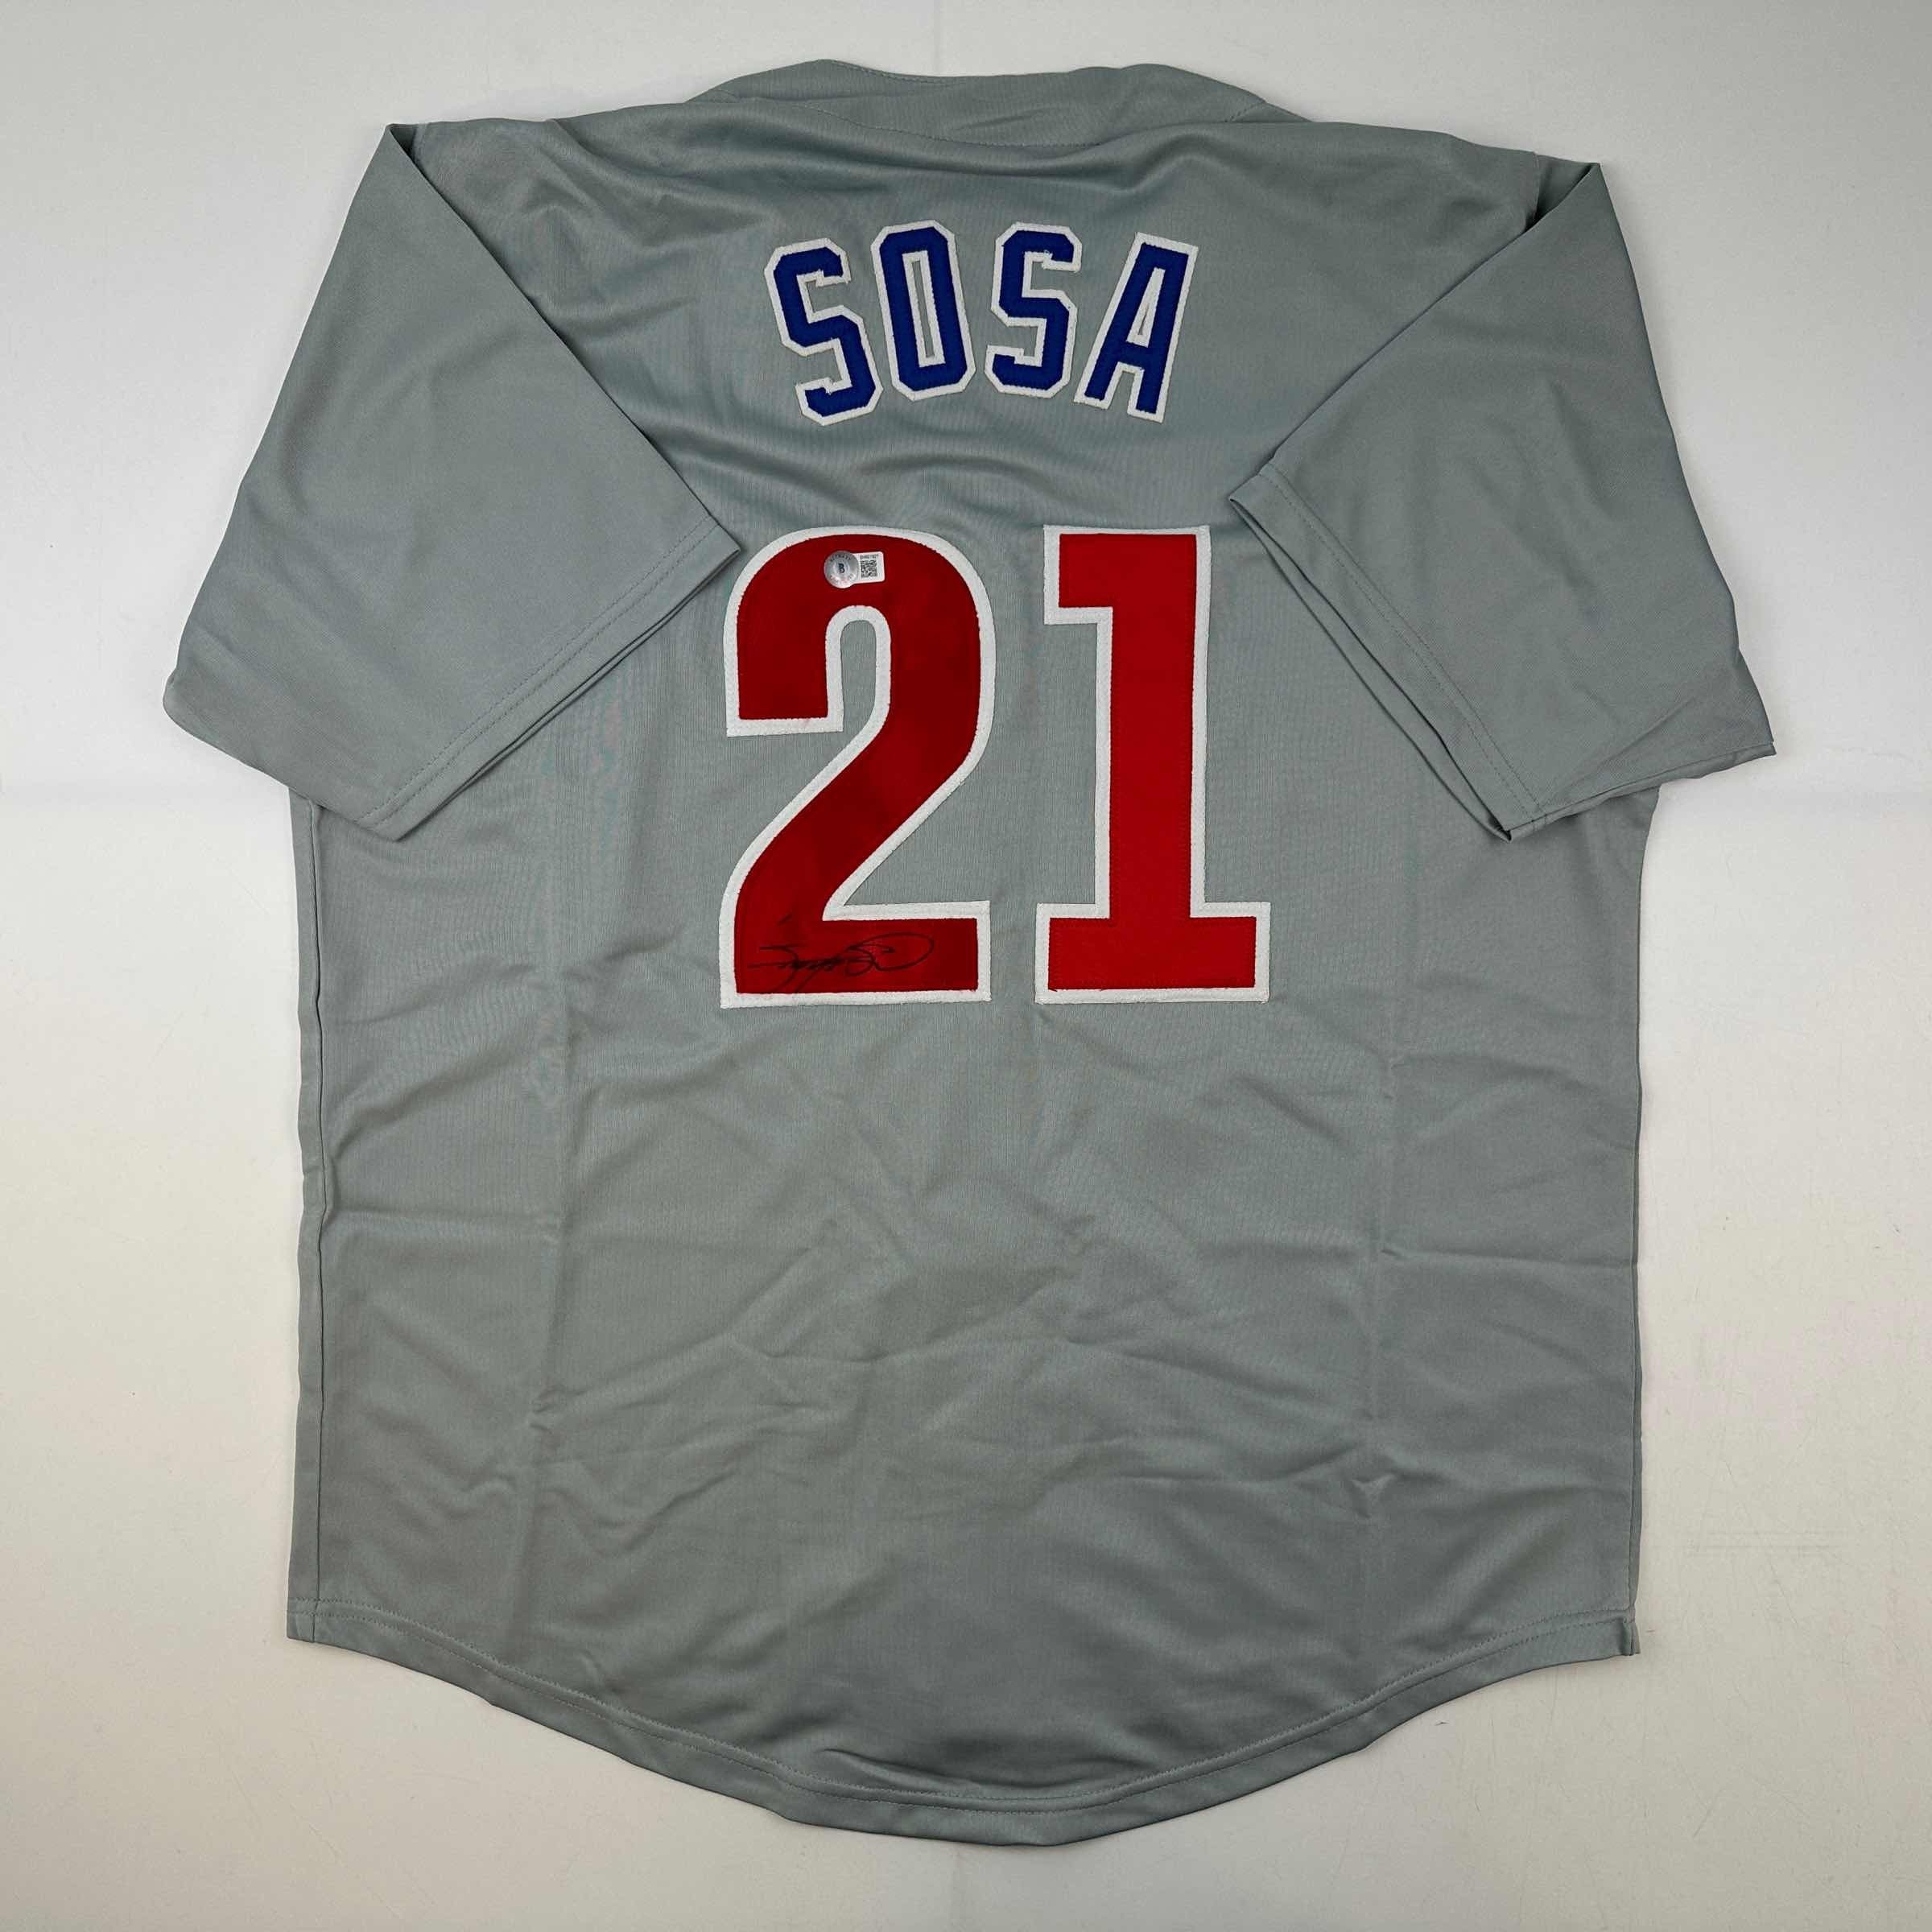 Men's Majestic Chicago Cubs #21 Sammy Sosa Authentic Blue/White Strip  Cooperstown Throwback MLB Jersey